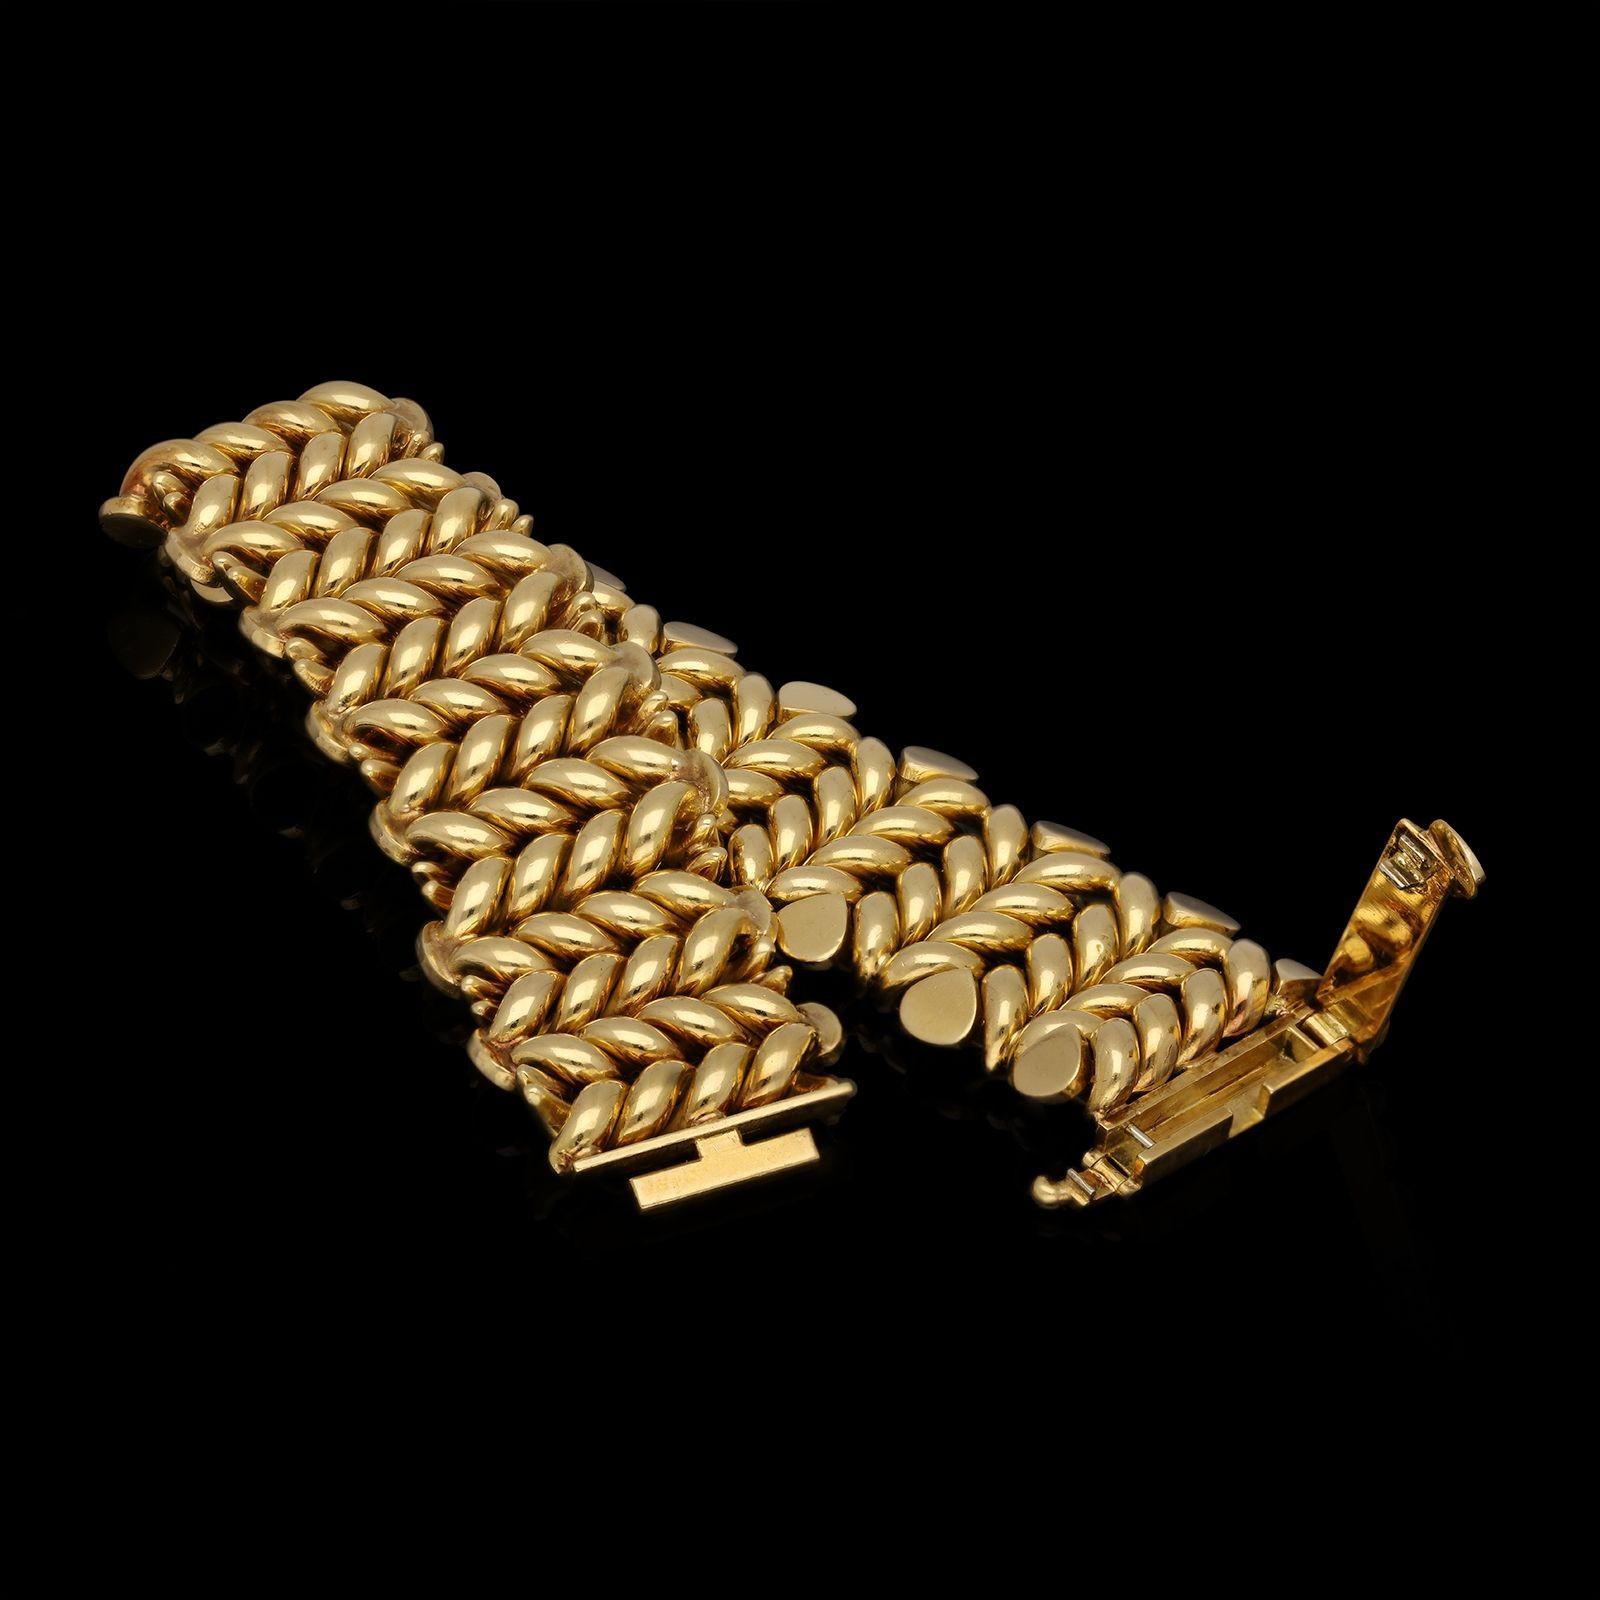 A wonderfully stylish vintage French gold bracelet by Mauboussin c.1970s, of twisted uniform bar link design, edged by rows of angled pear-shape motifs, all in highly polished 18ct yellow gold to a concealed clasp. This a beautifully supple and